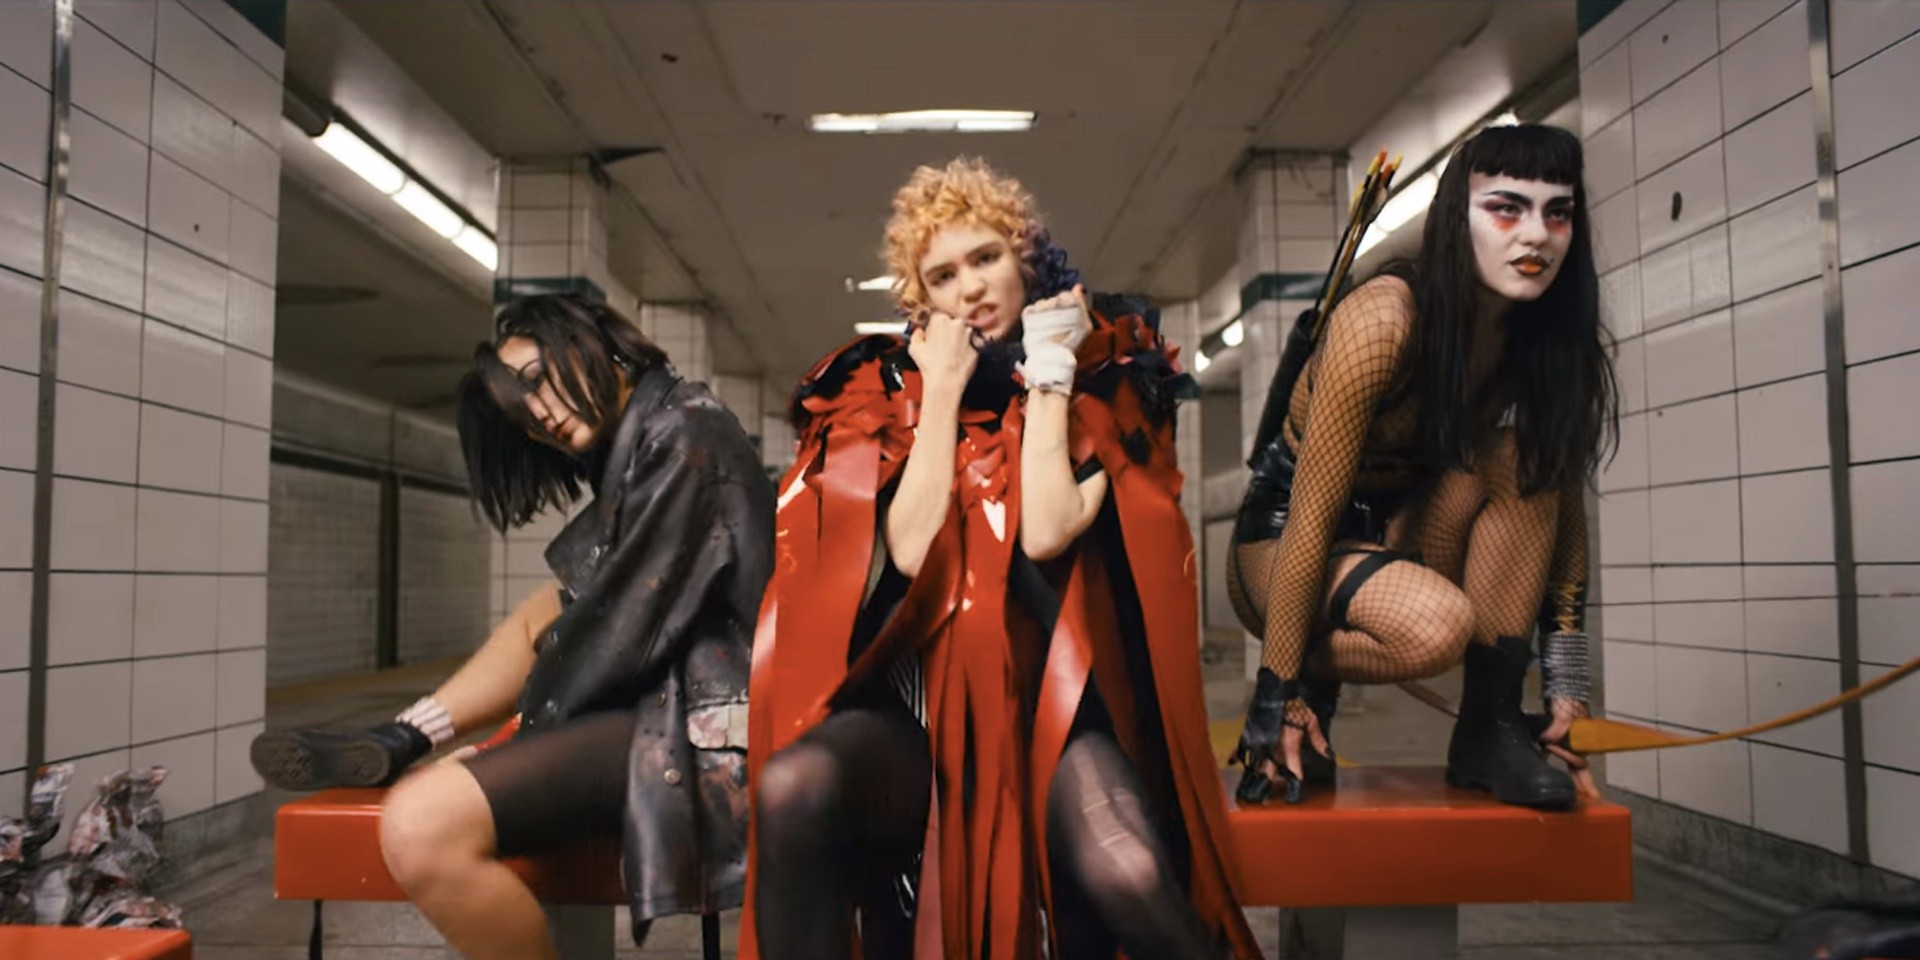 WATCH: Grimes' new hyper-surreal video for 'Kill V. Maim'